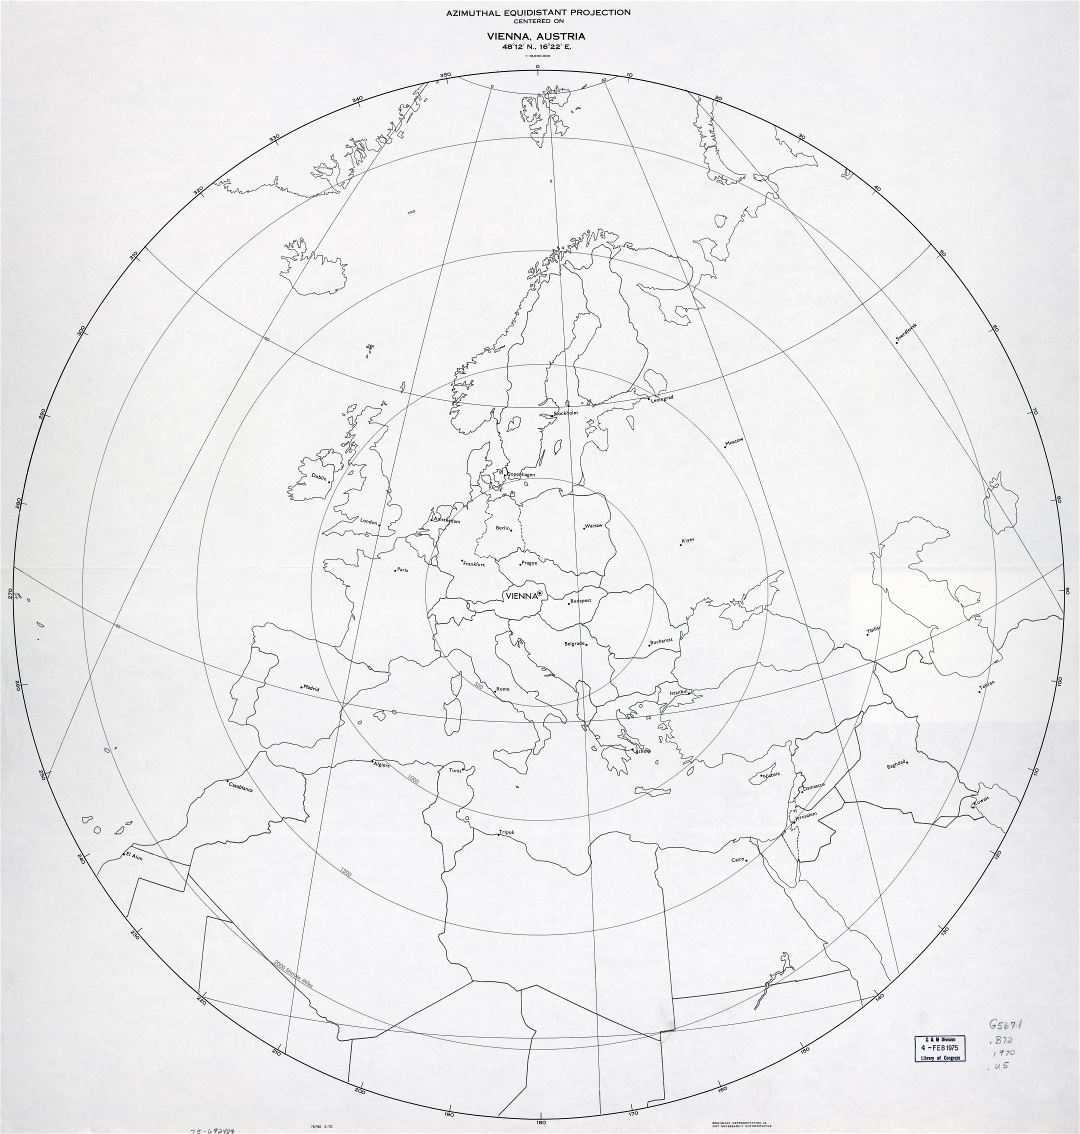 Large scale detail azimuthal equidistant projection map centered on Vienna, Austria - 1970